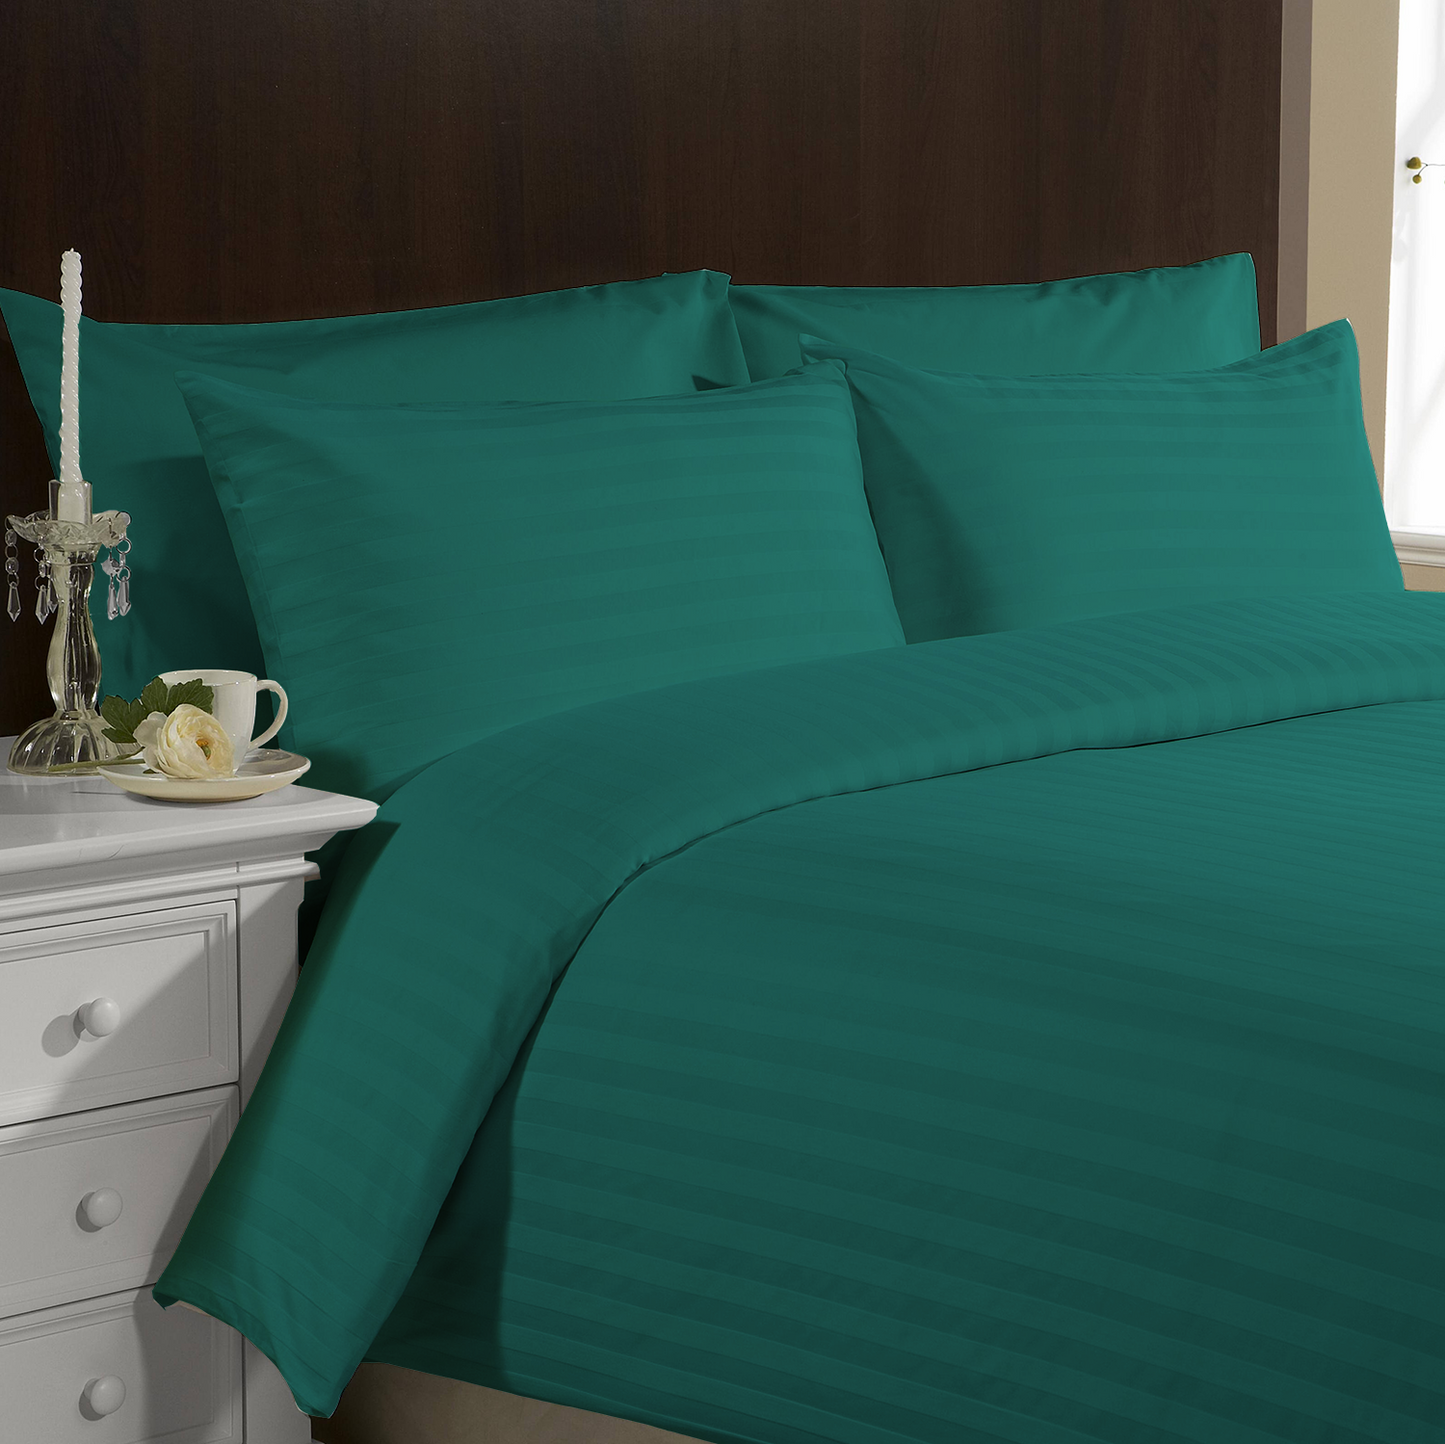 Green & Teal Hotel Stripes Beddings